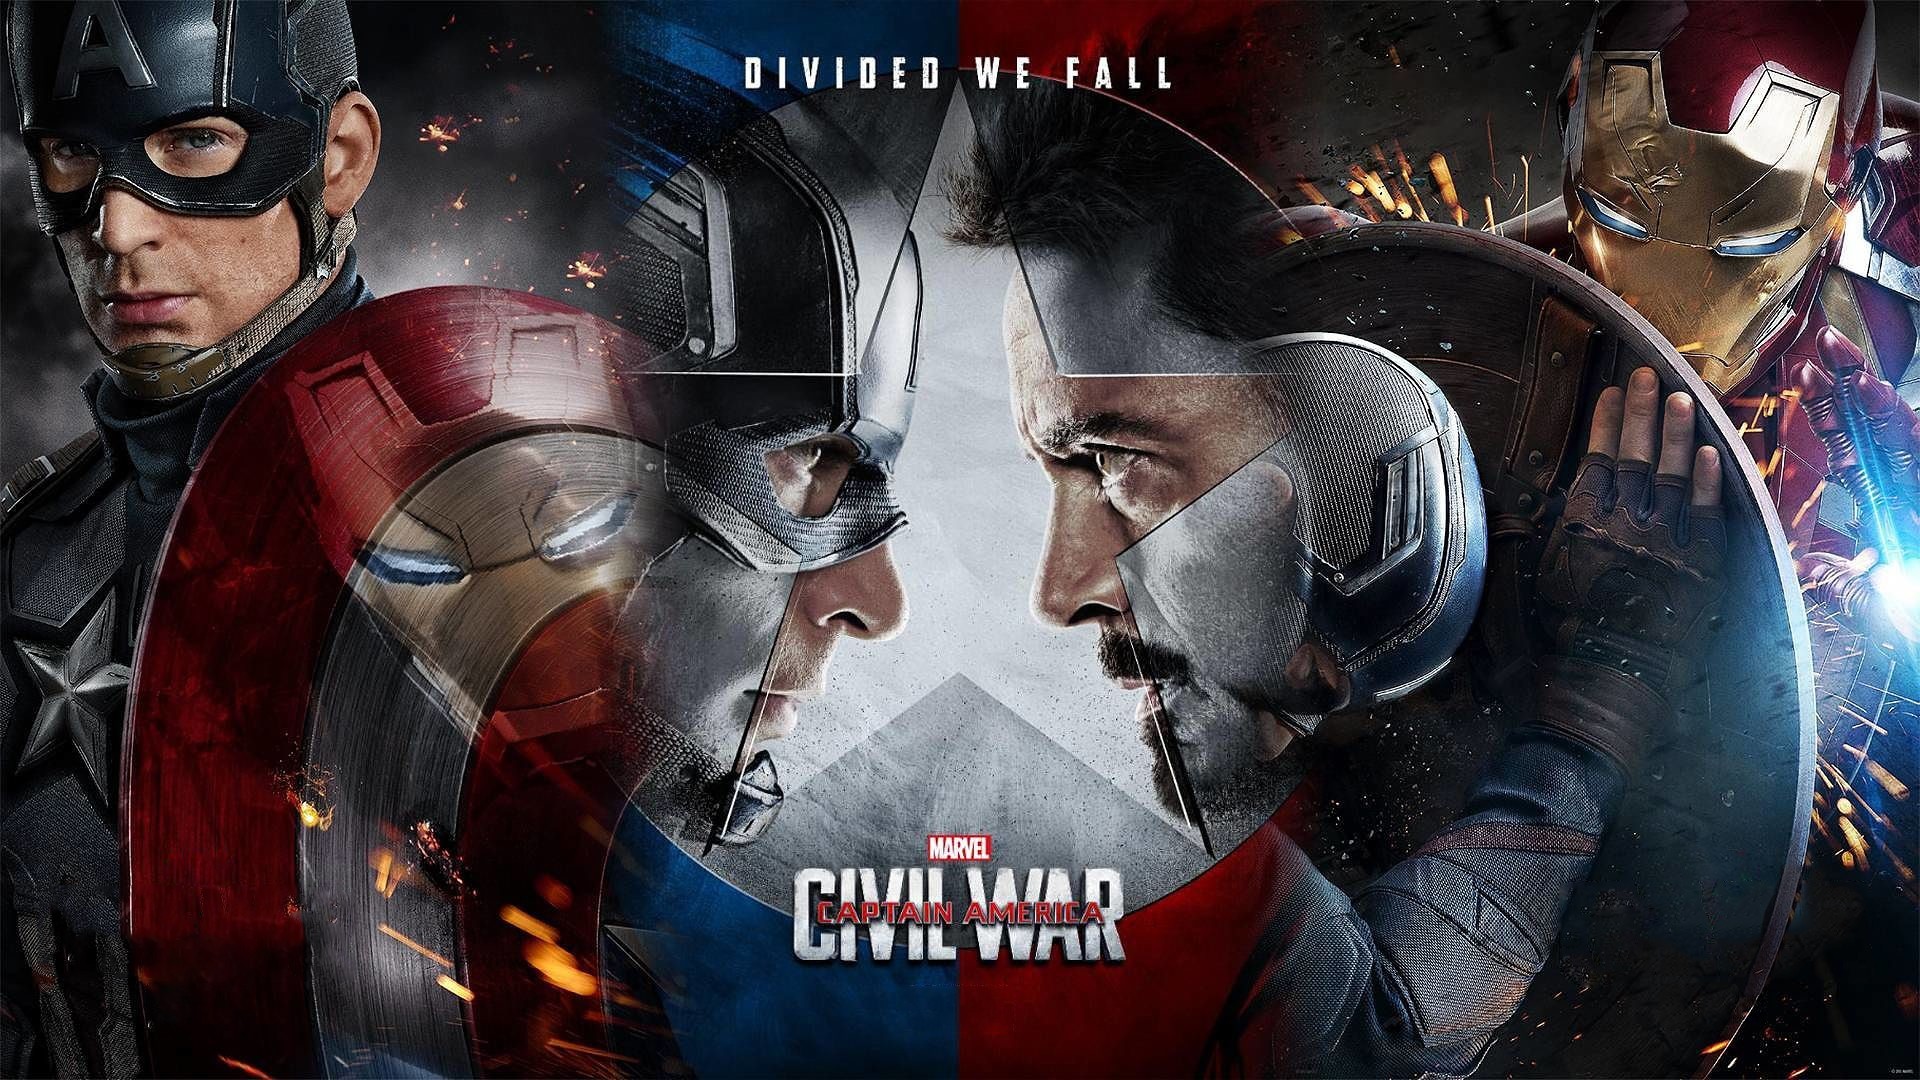 Team Captain America Civil War Movie and Character Posters revealed Team Ironman Civil War Short on Spiderman captain america